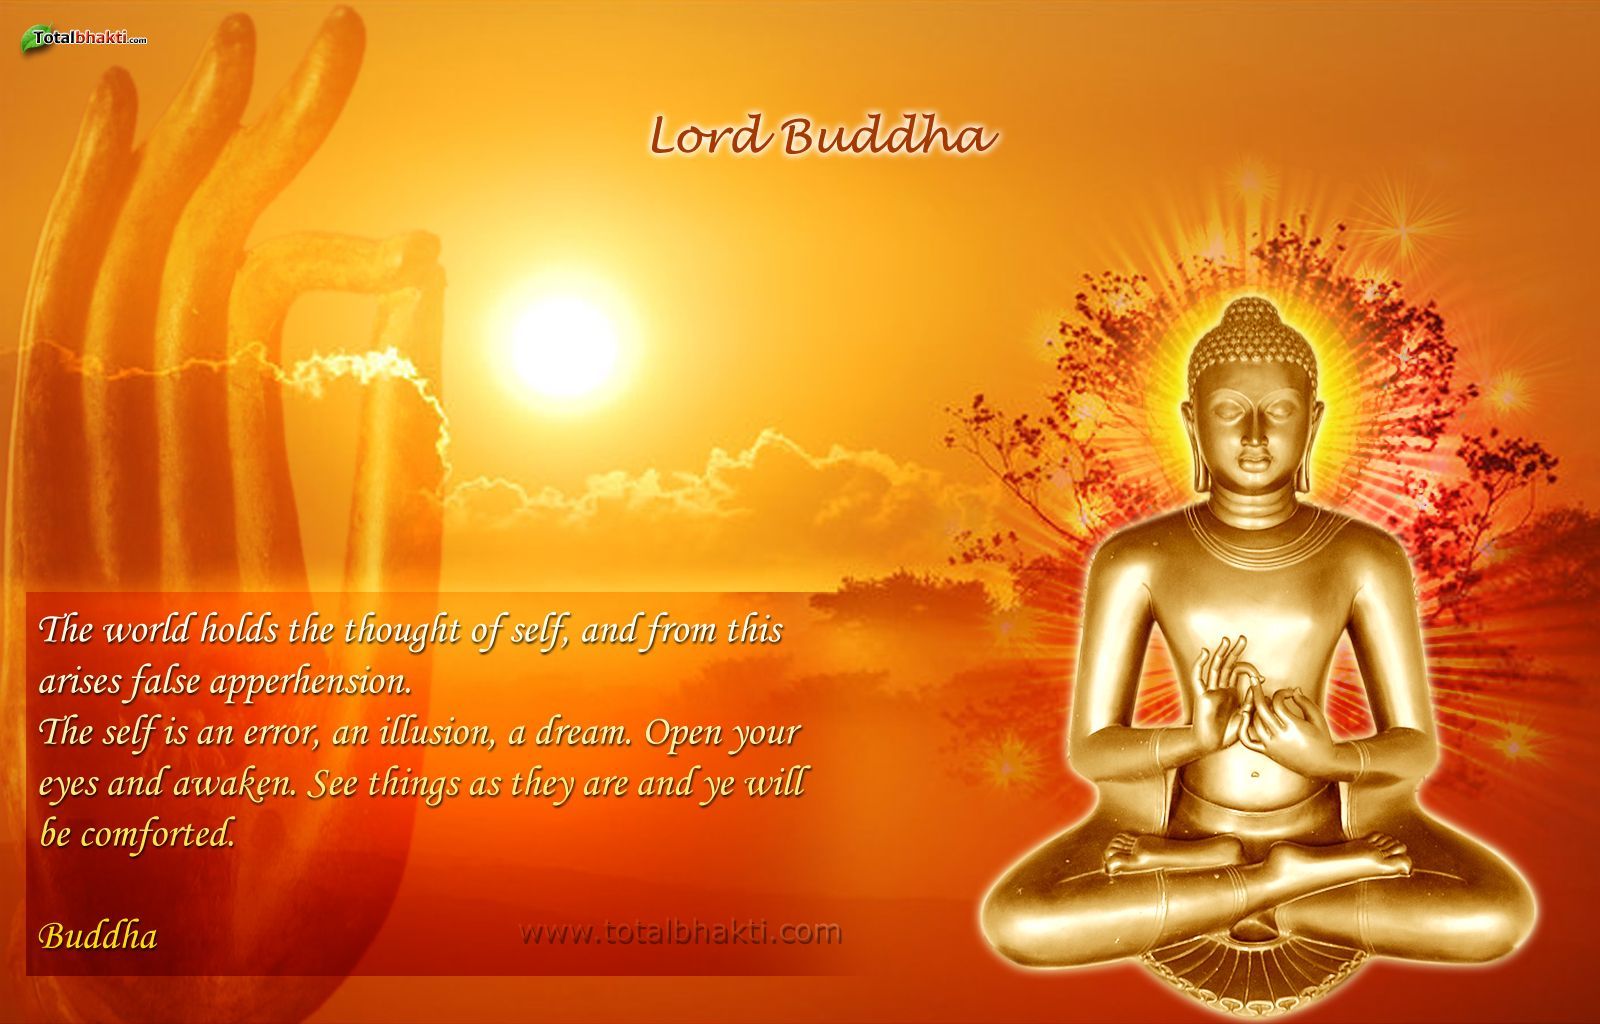 buddhist quotes. Buddha Wallpaper Quotes By Gautam Free Buddhist Wallpaper. Buddha, Law of attraction, Manifesting dreams